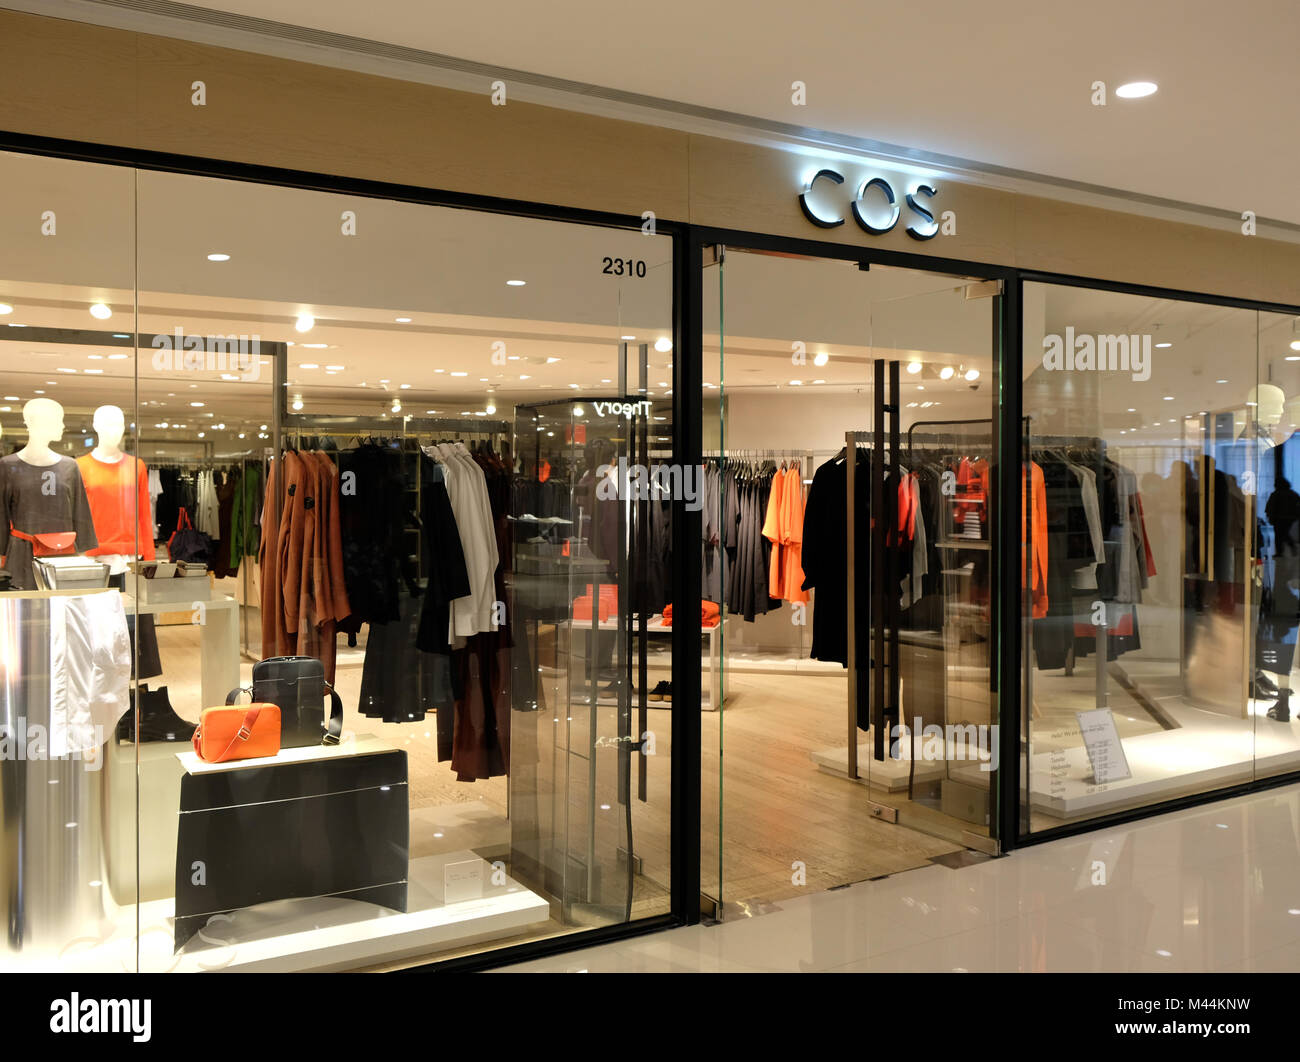 Cos Store Stock Photos & Cos Store Stock Images - Alamy